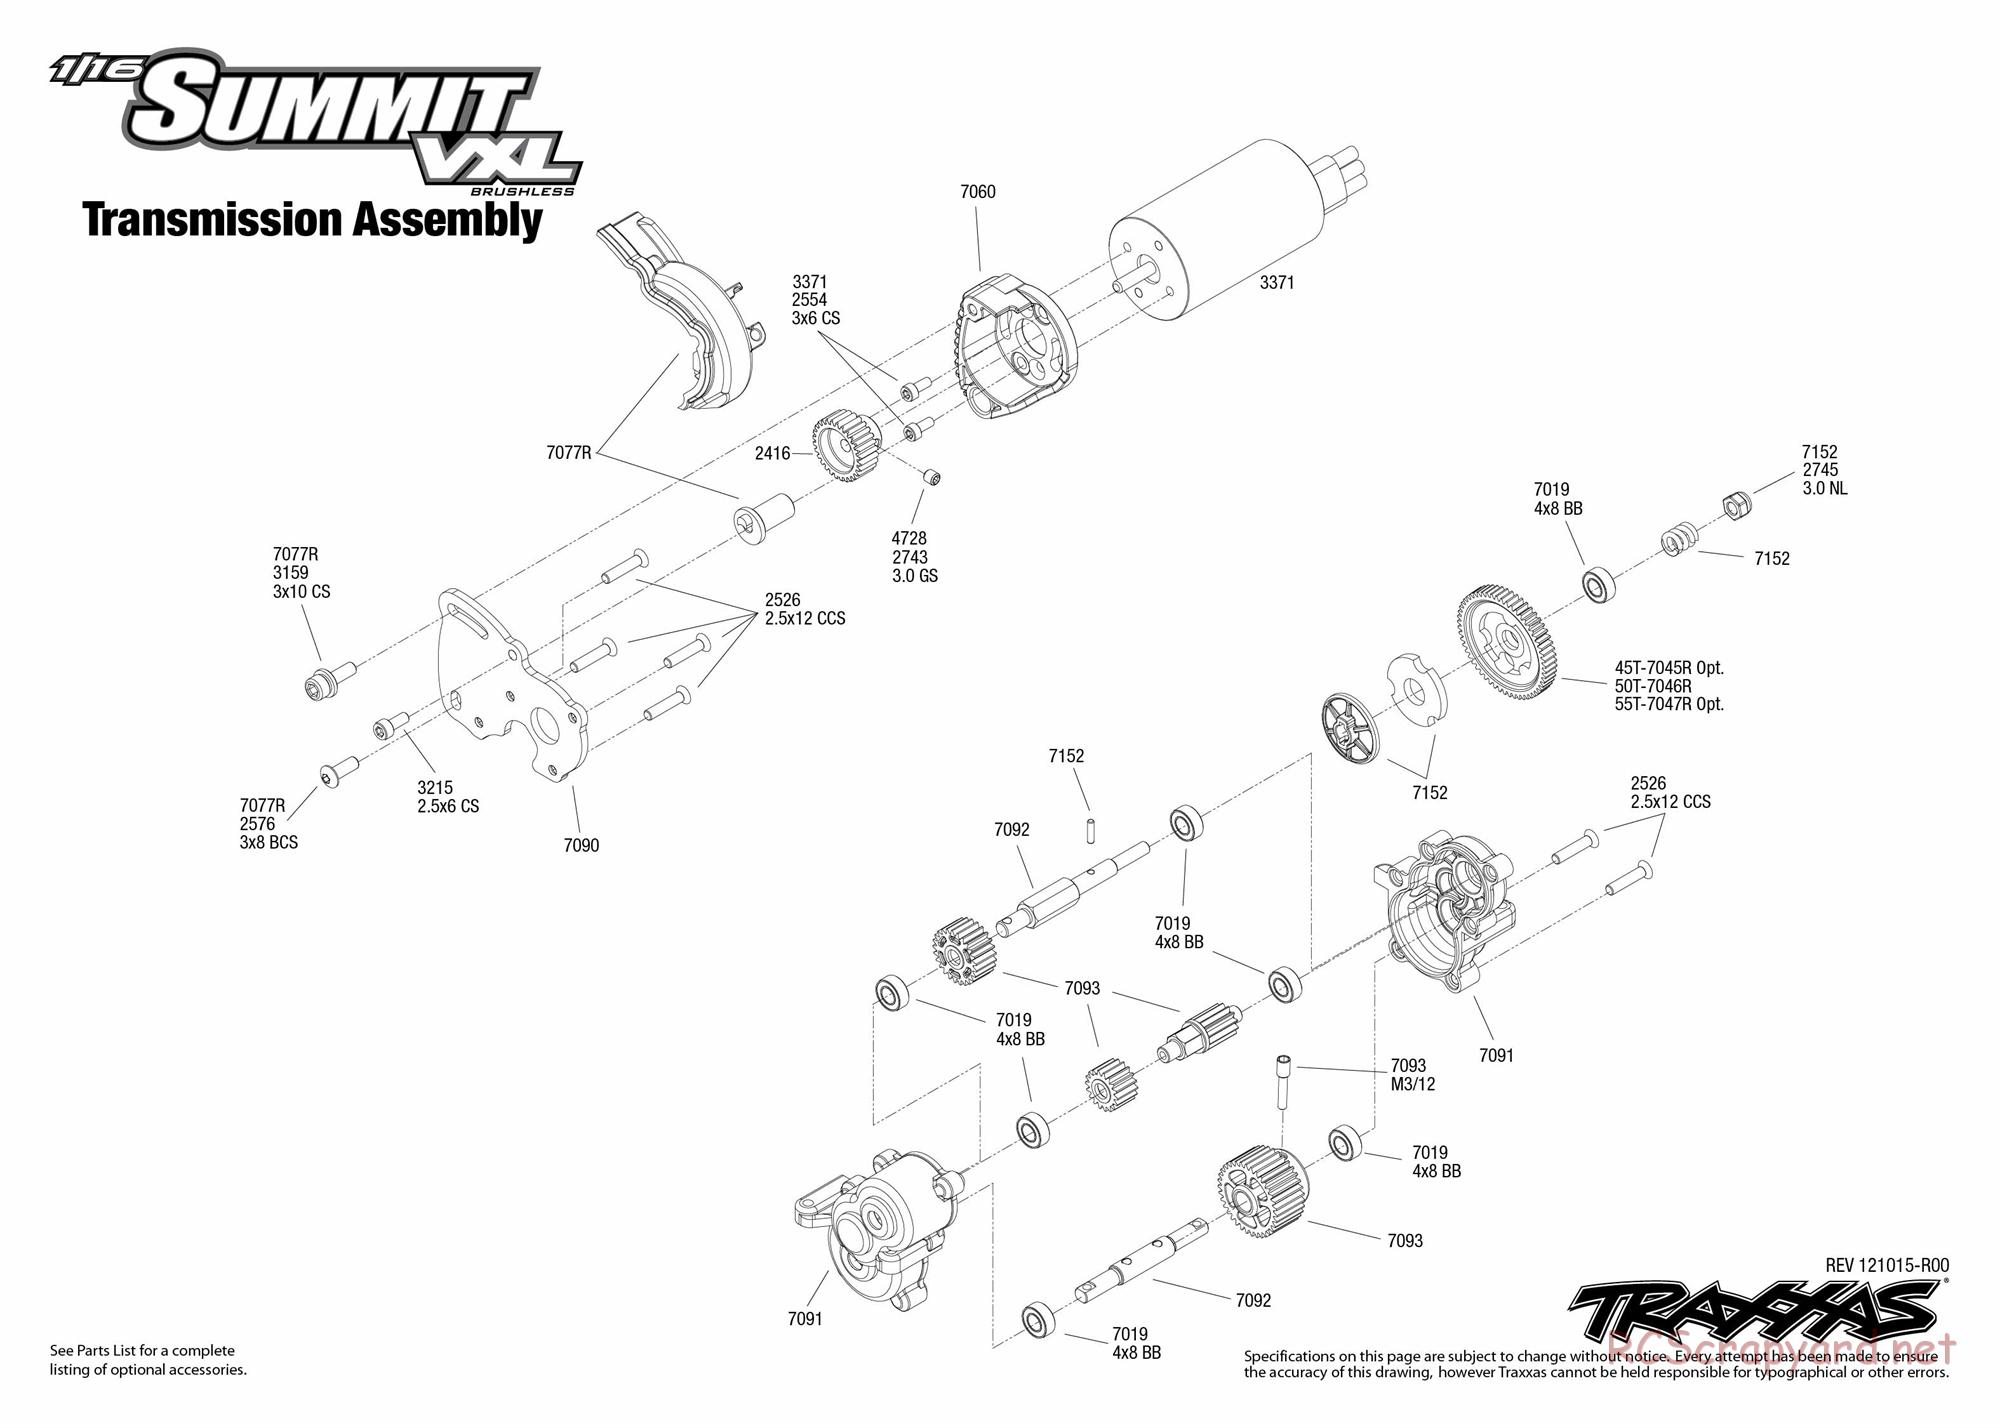 Traxxas - 1/16 Summit VXL (2012) - Exploded Views - Page 5